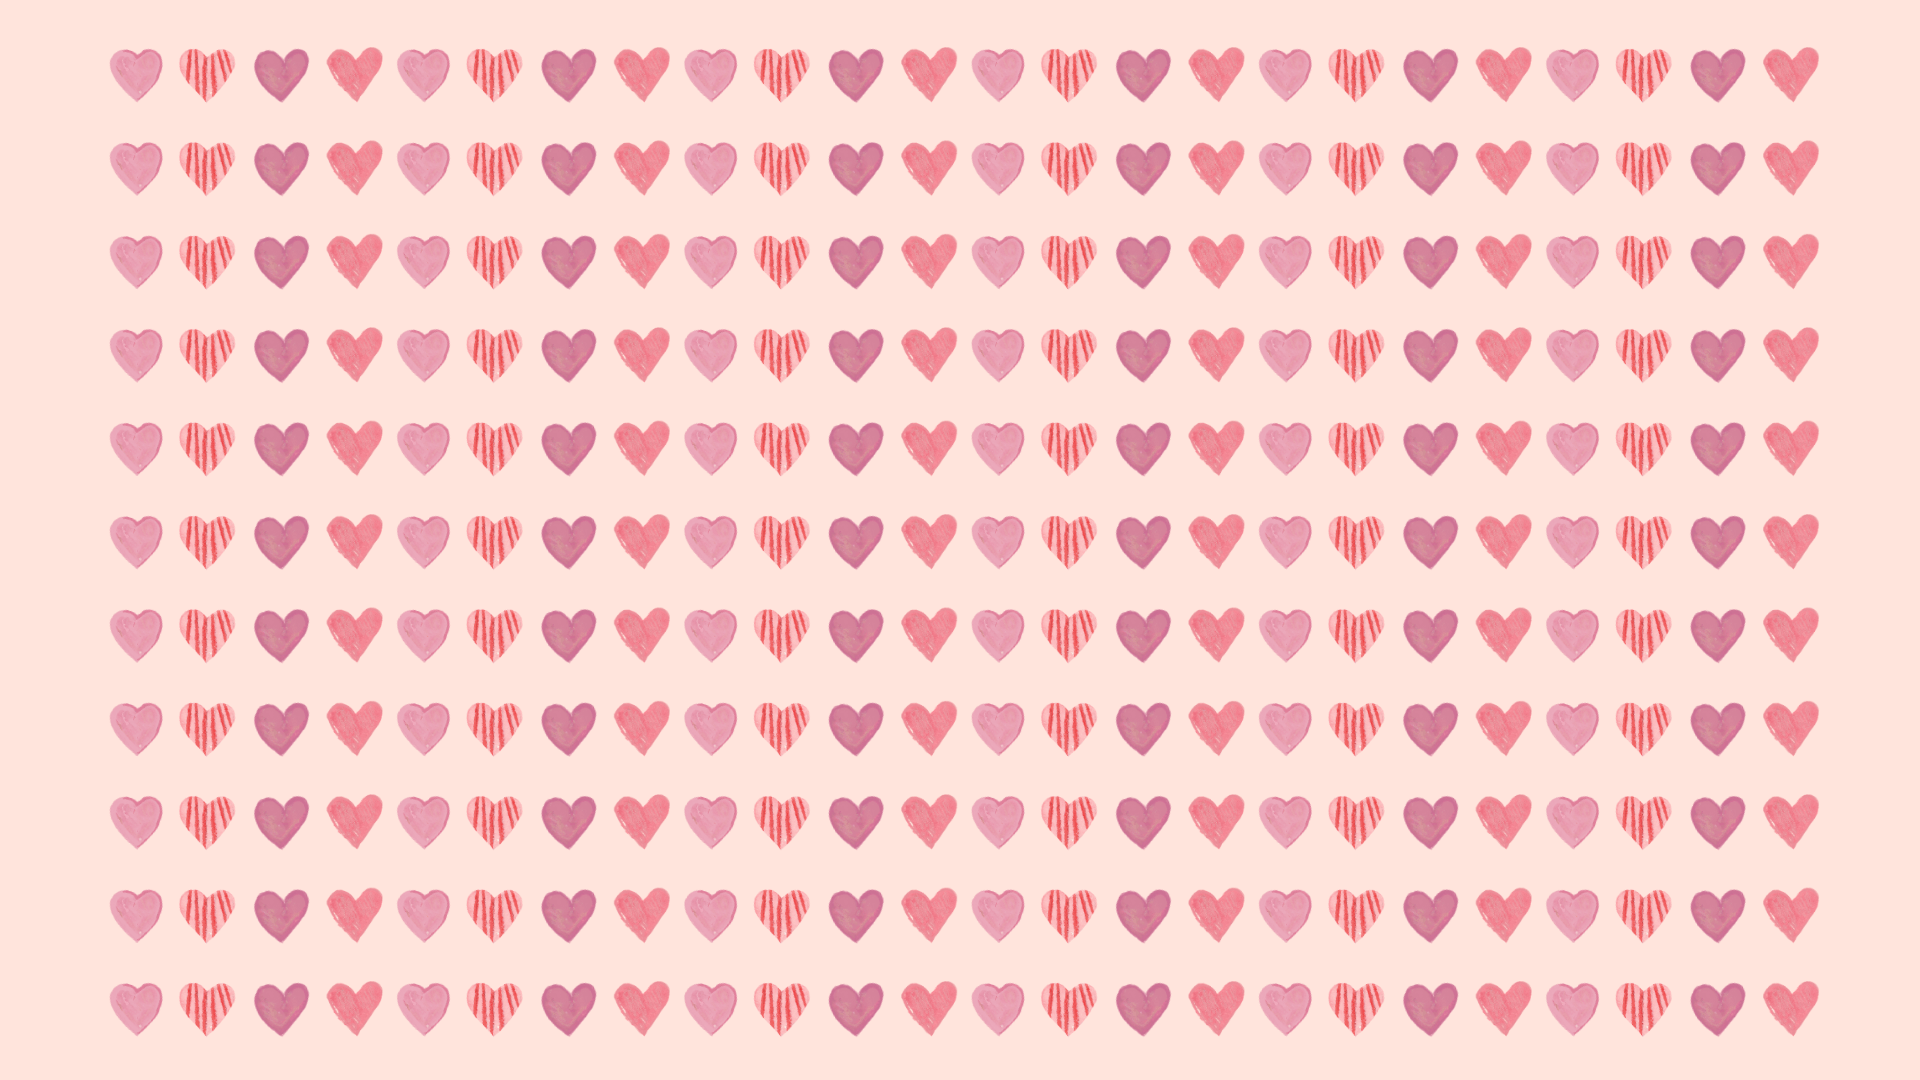 A grid of hearts in varying shades of pink and red on a light pink background - Valentine's Day